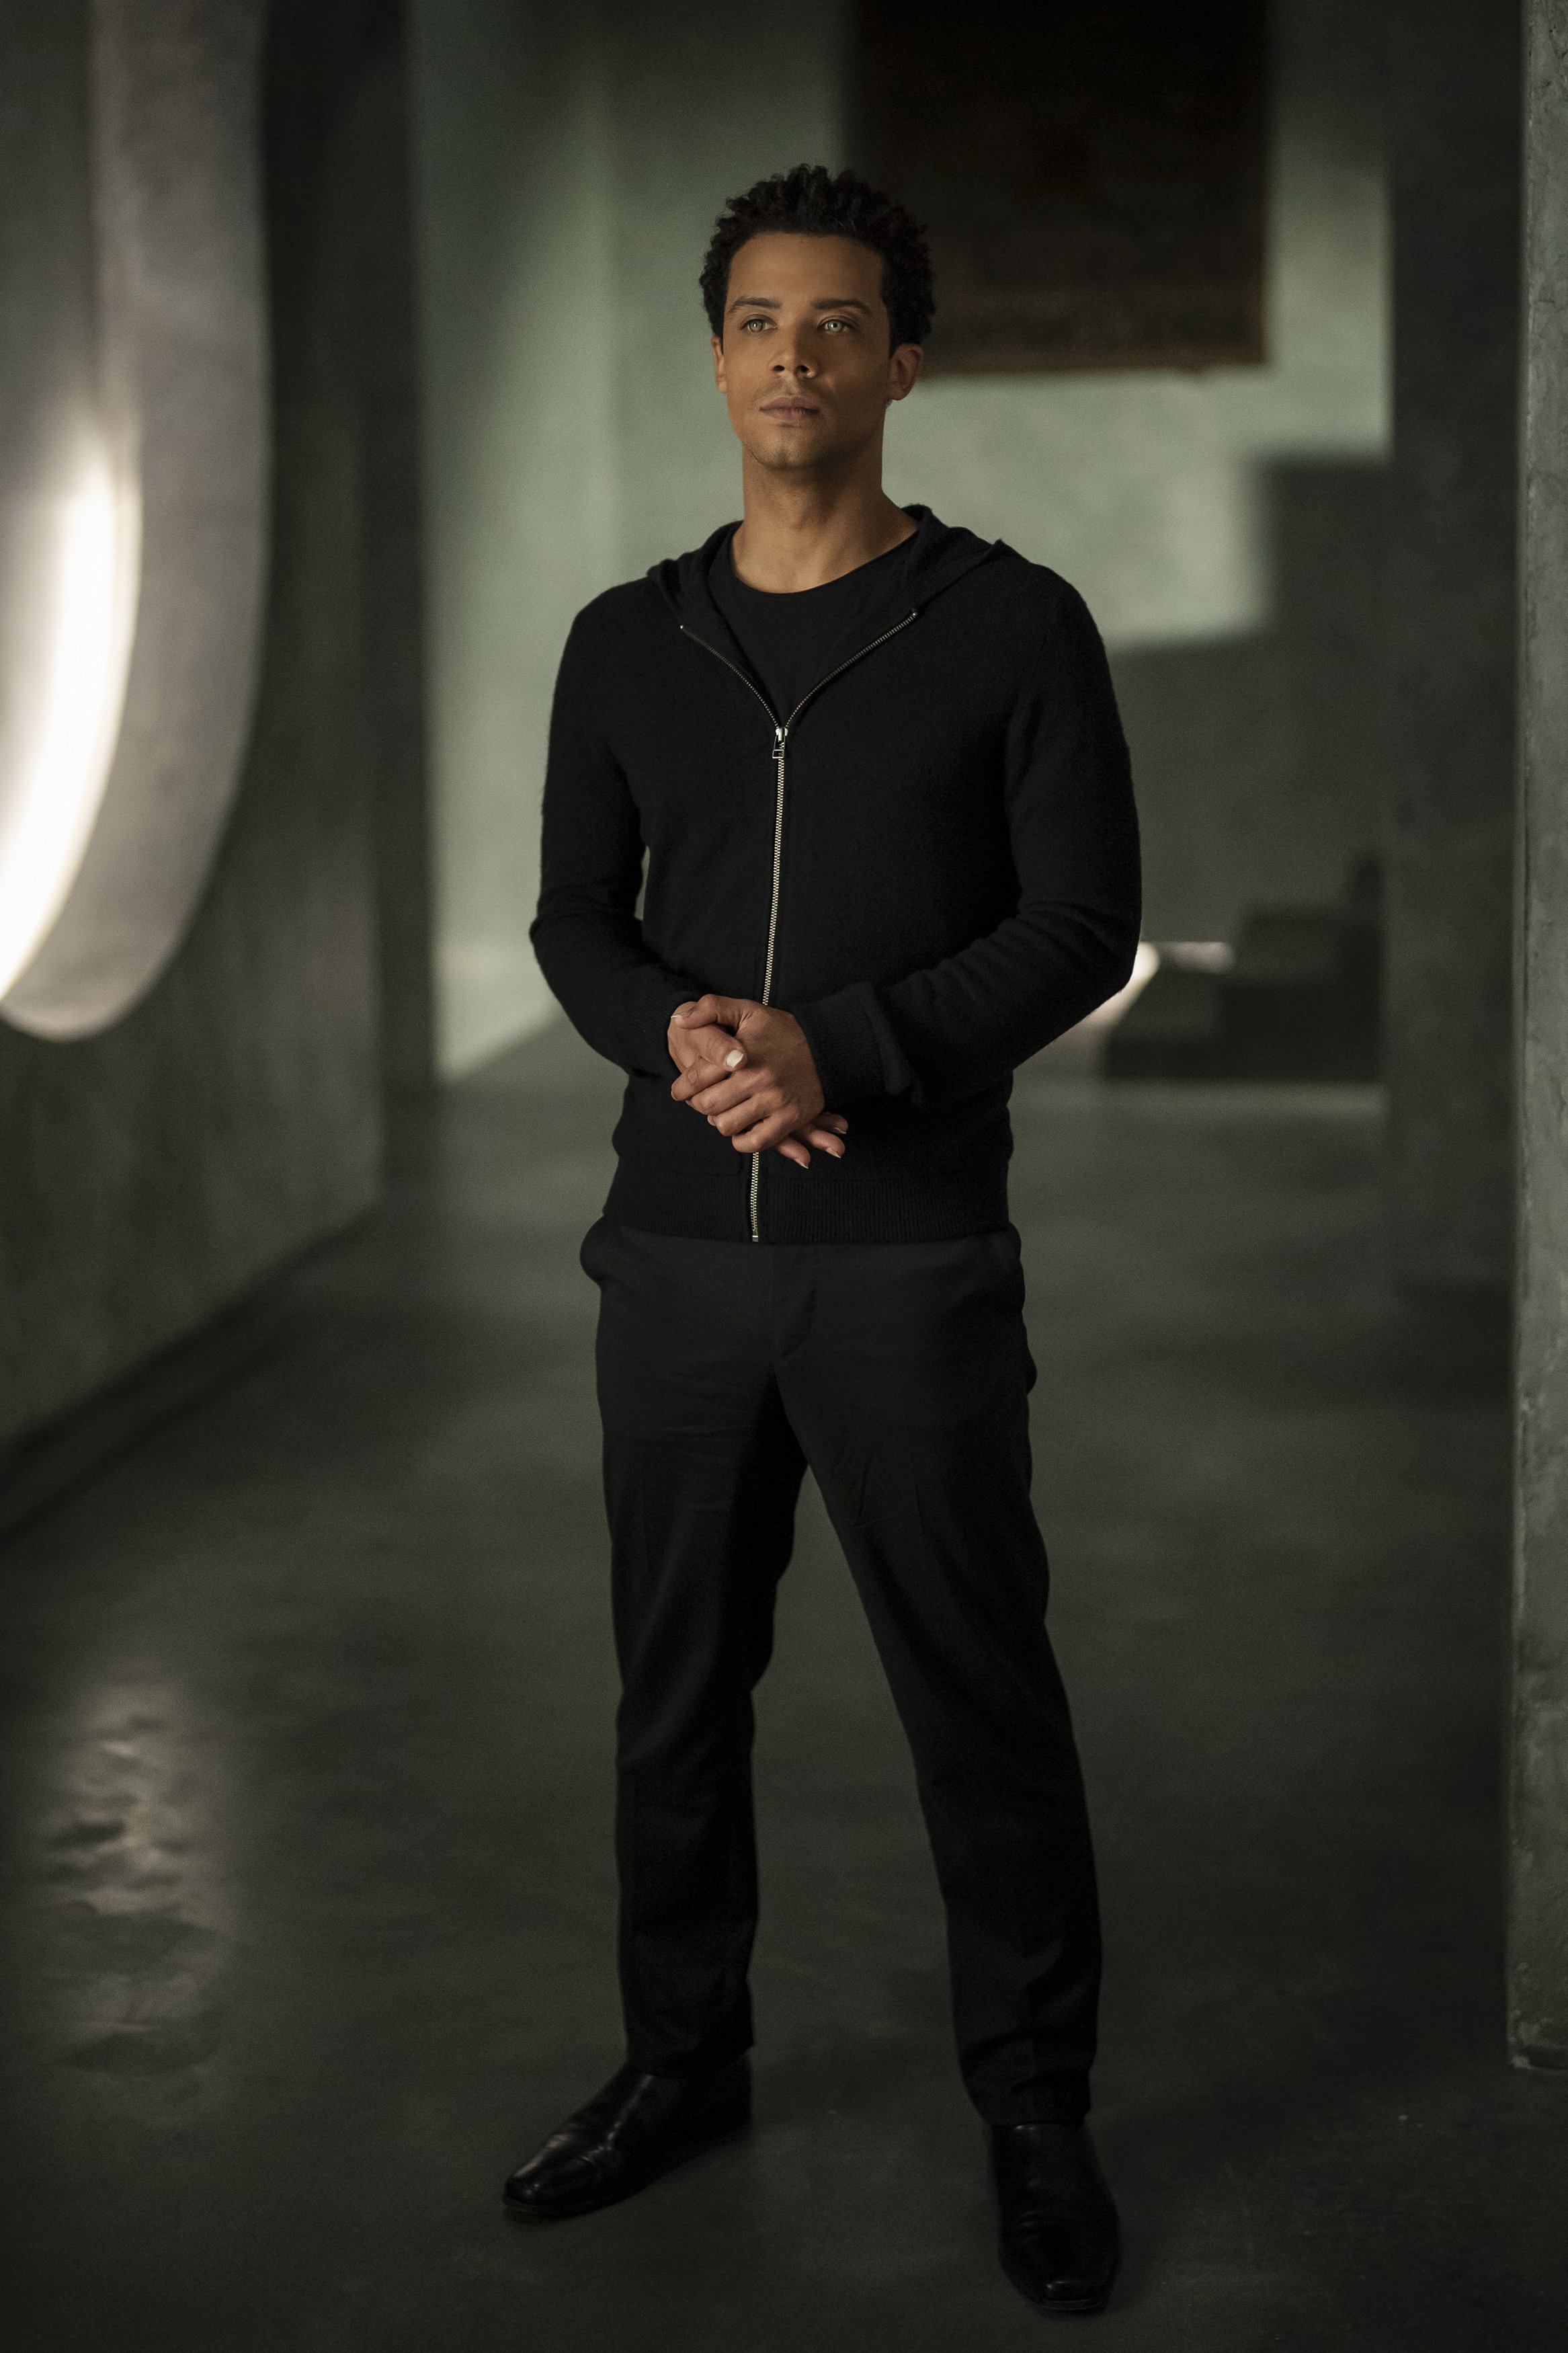  Jacob Anderson as Louis De Point Du Lac - Interview with the Vampire _ Seaosn 1, Gallery - Photo Credit: Alfonso Bresciani/AMC 